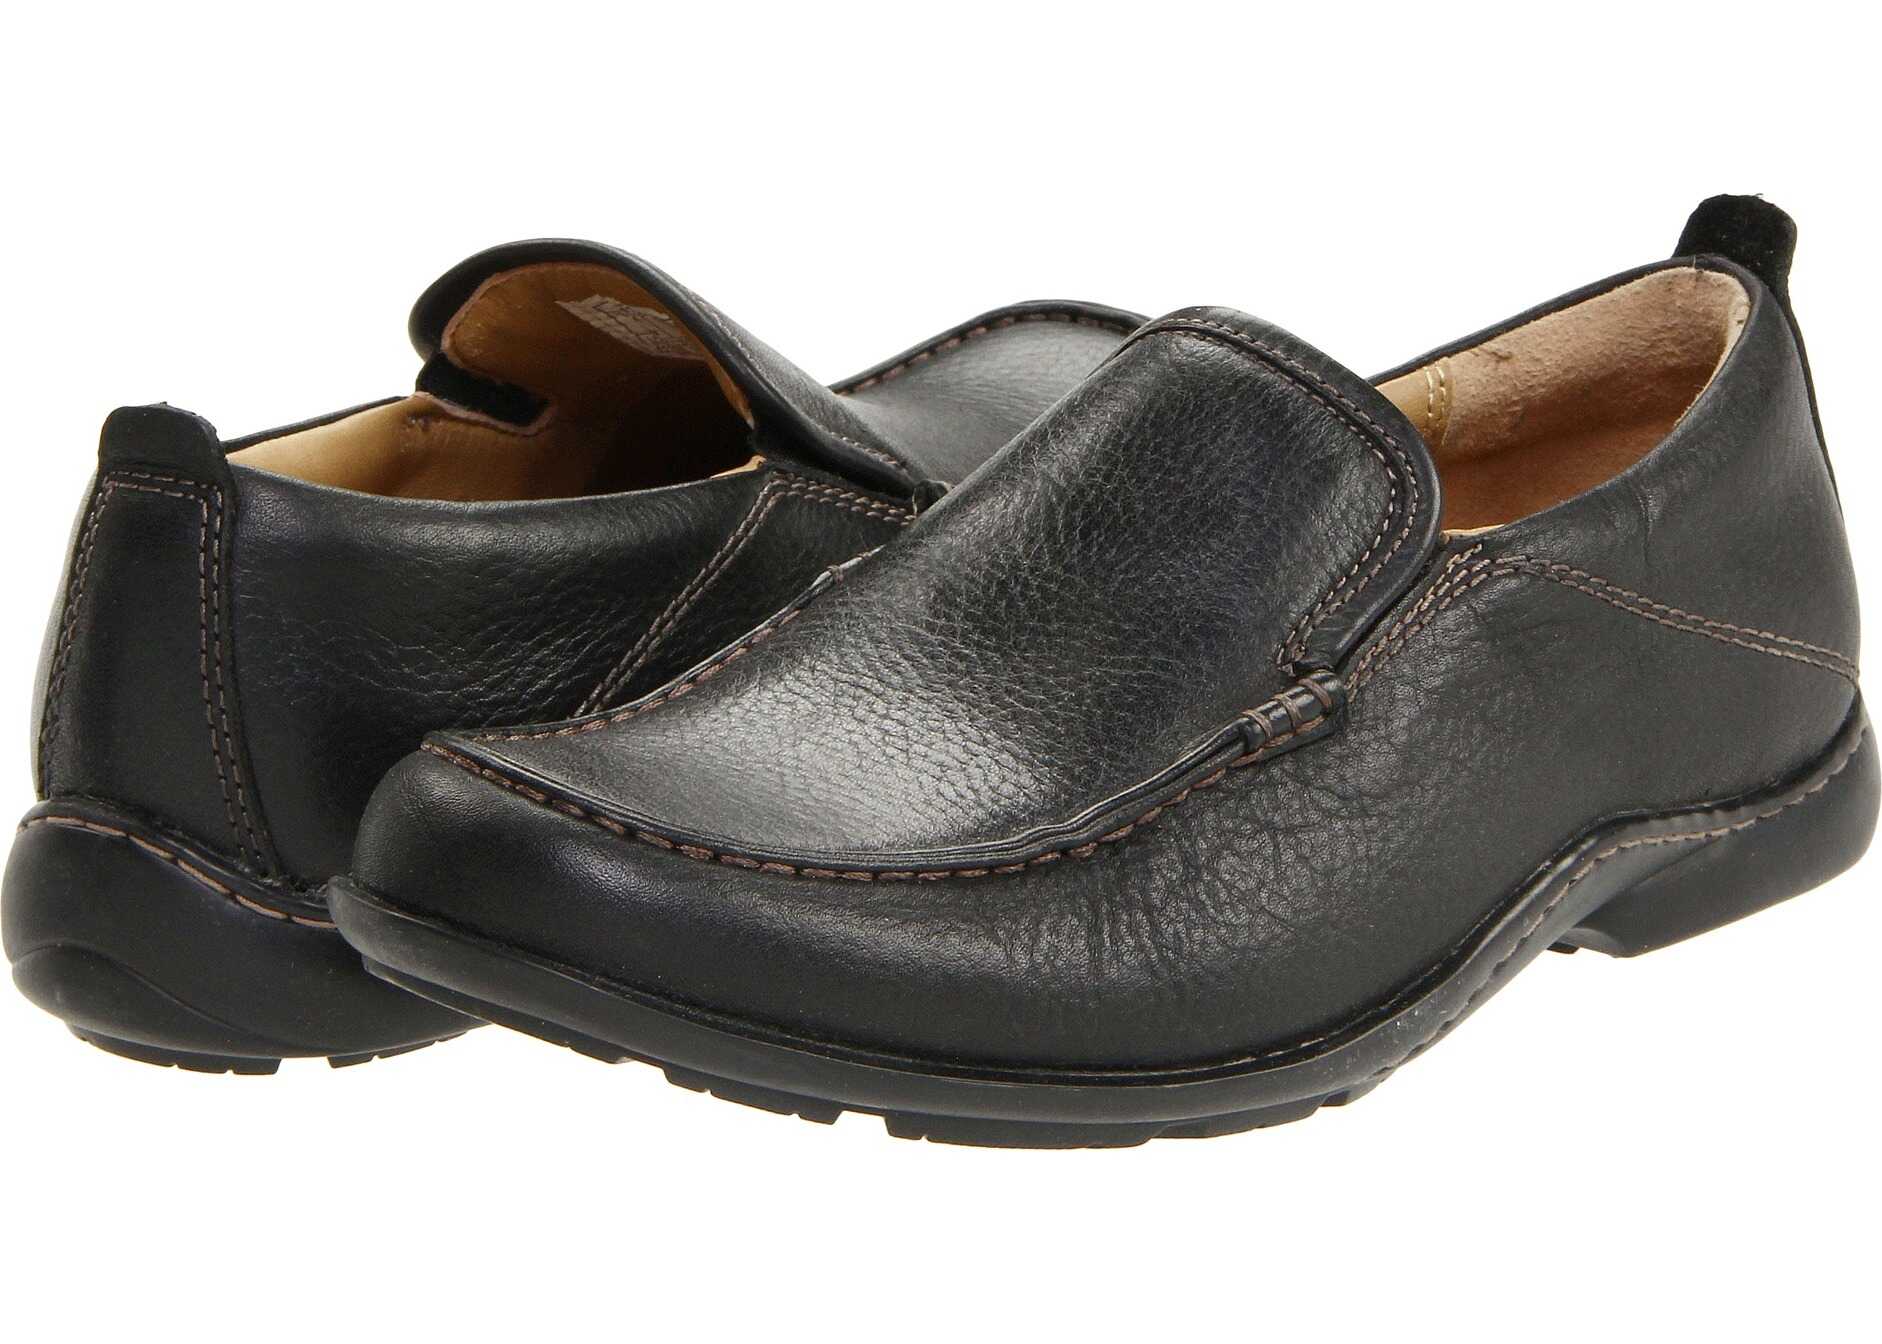 Hush Puppies GT Black Leather